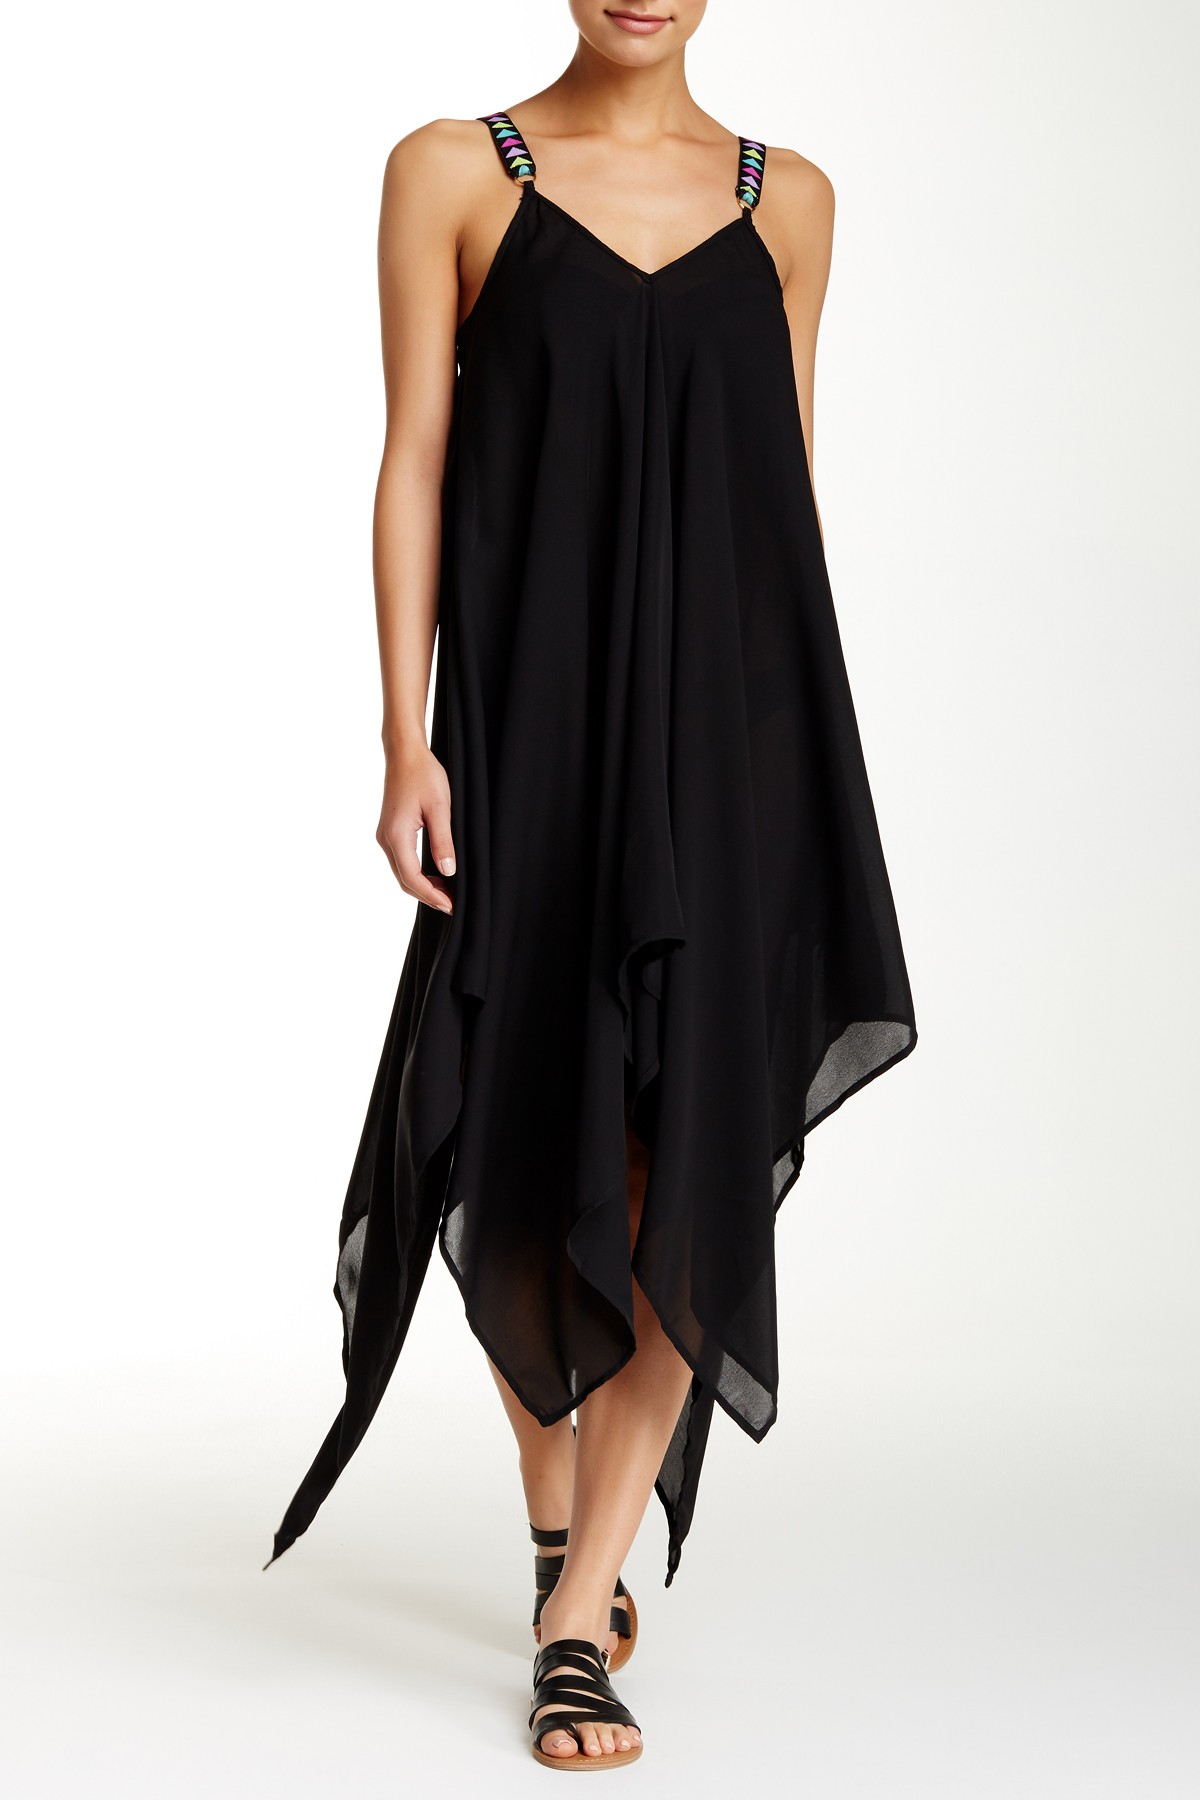 Jessica Simpson Chiffon Cover-up Dress in Black - Lyst